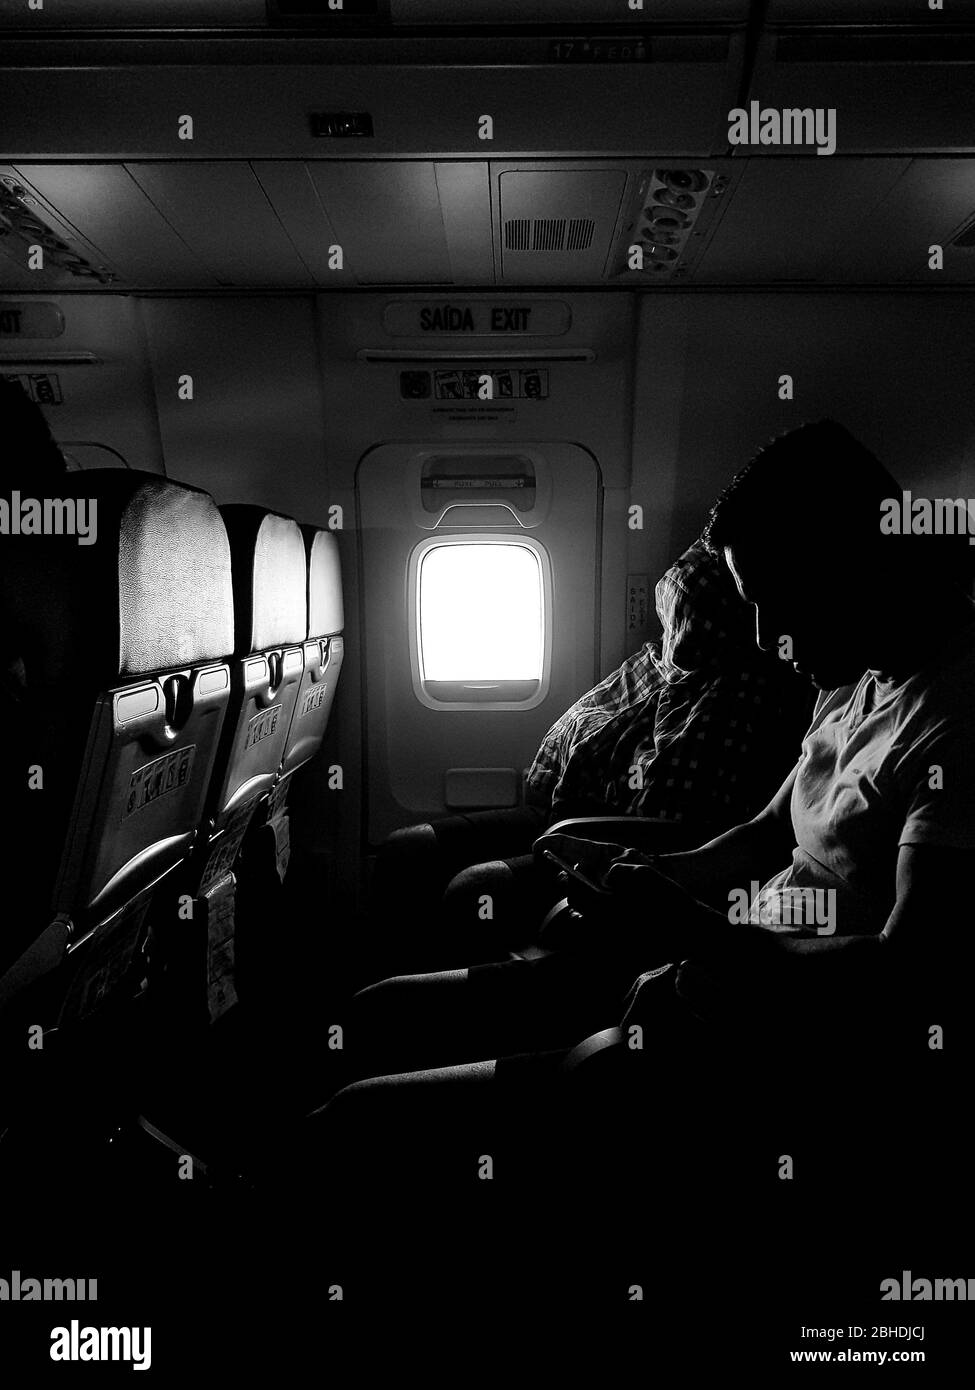 black and white photo of two people sitting in commercial plane Stock Photo